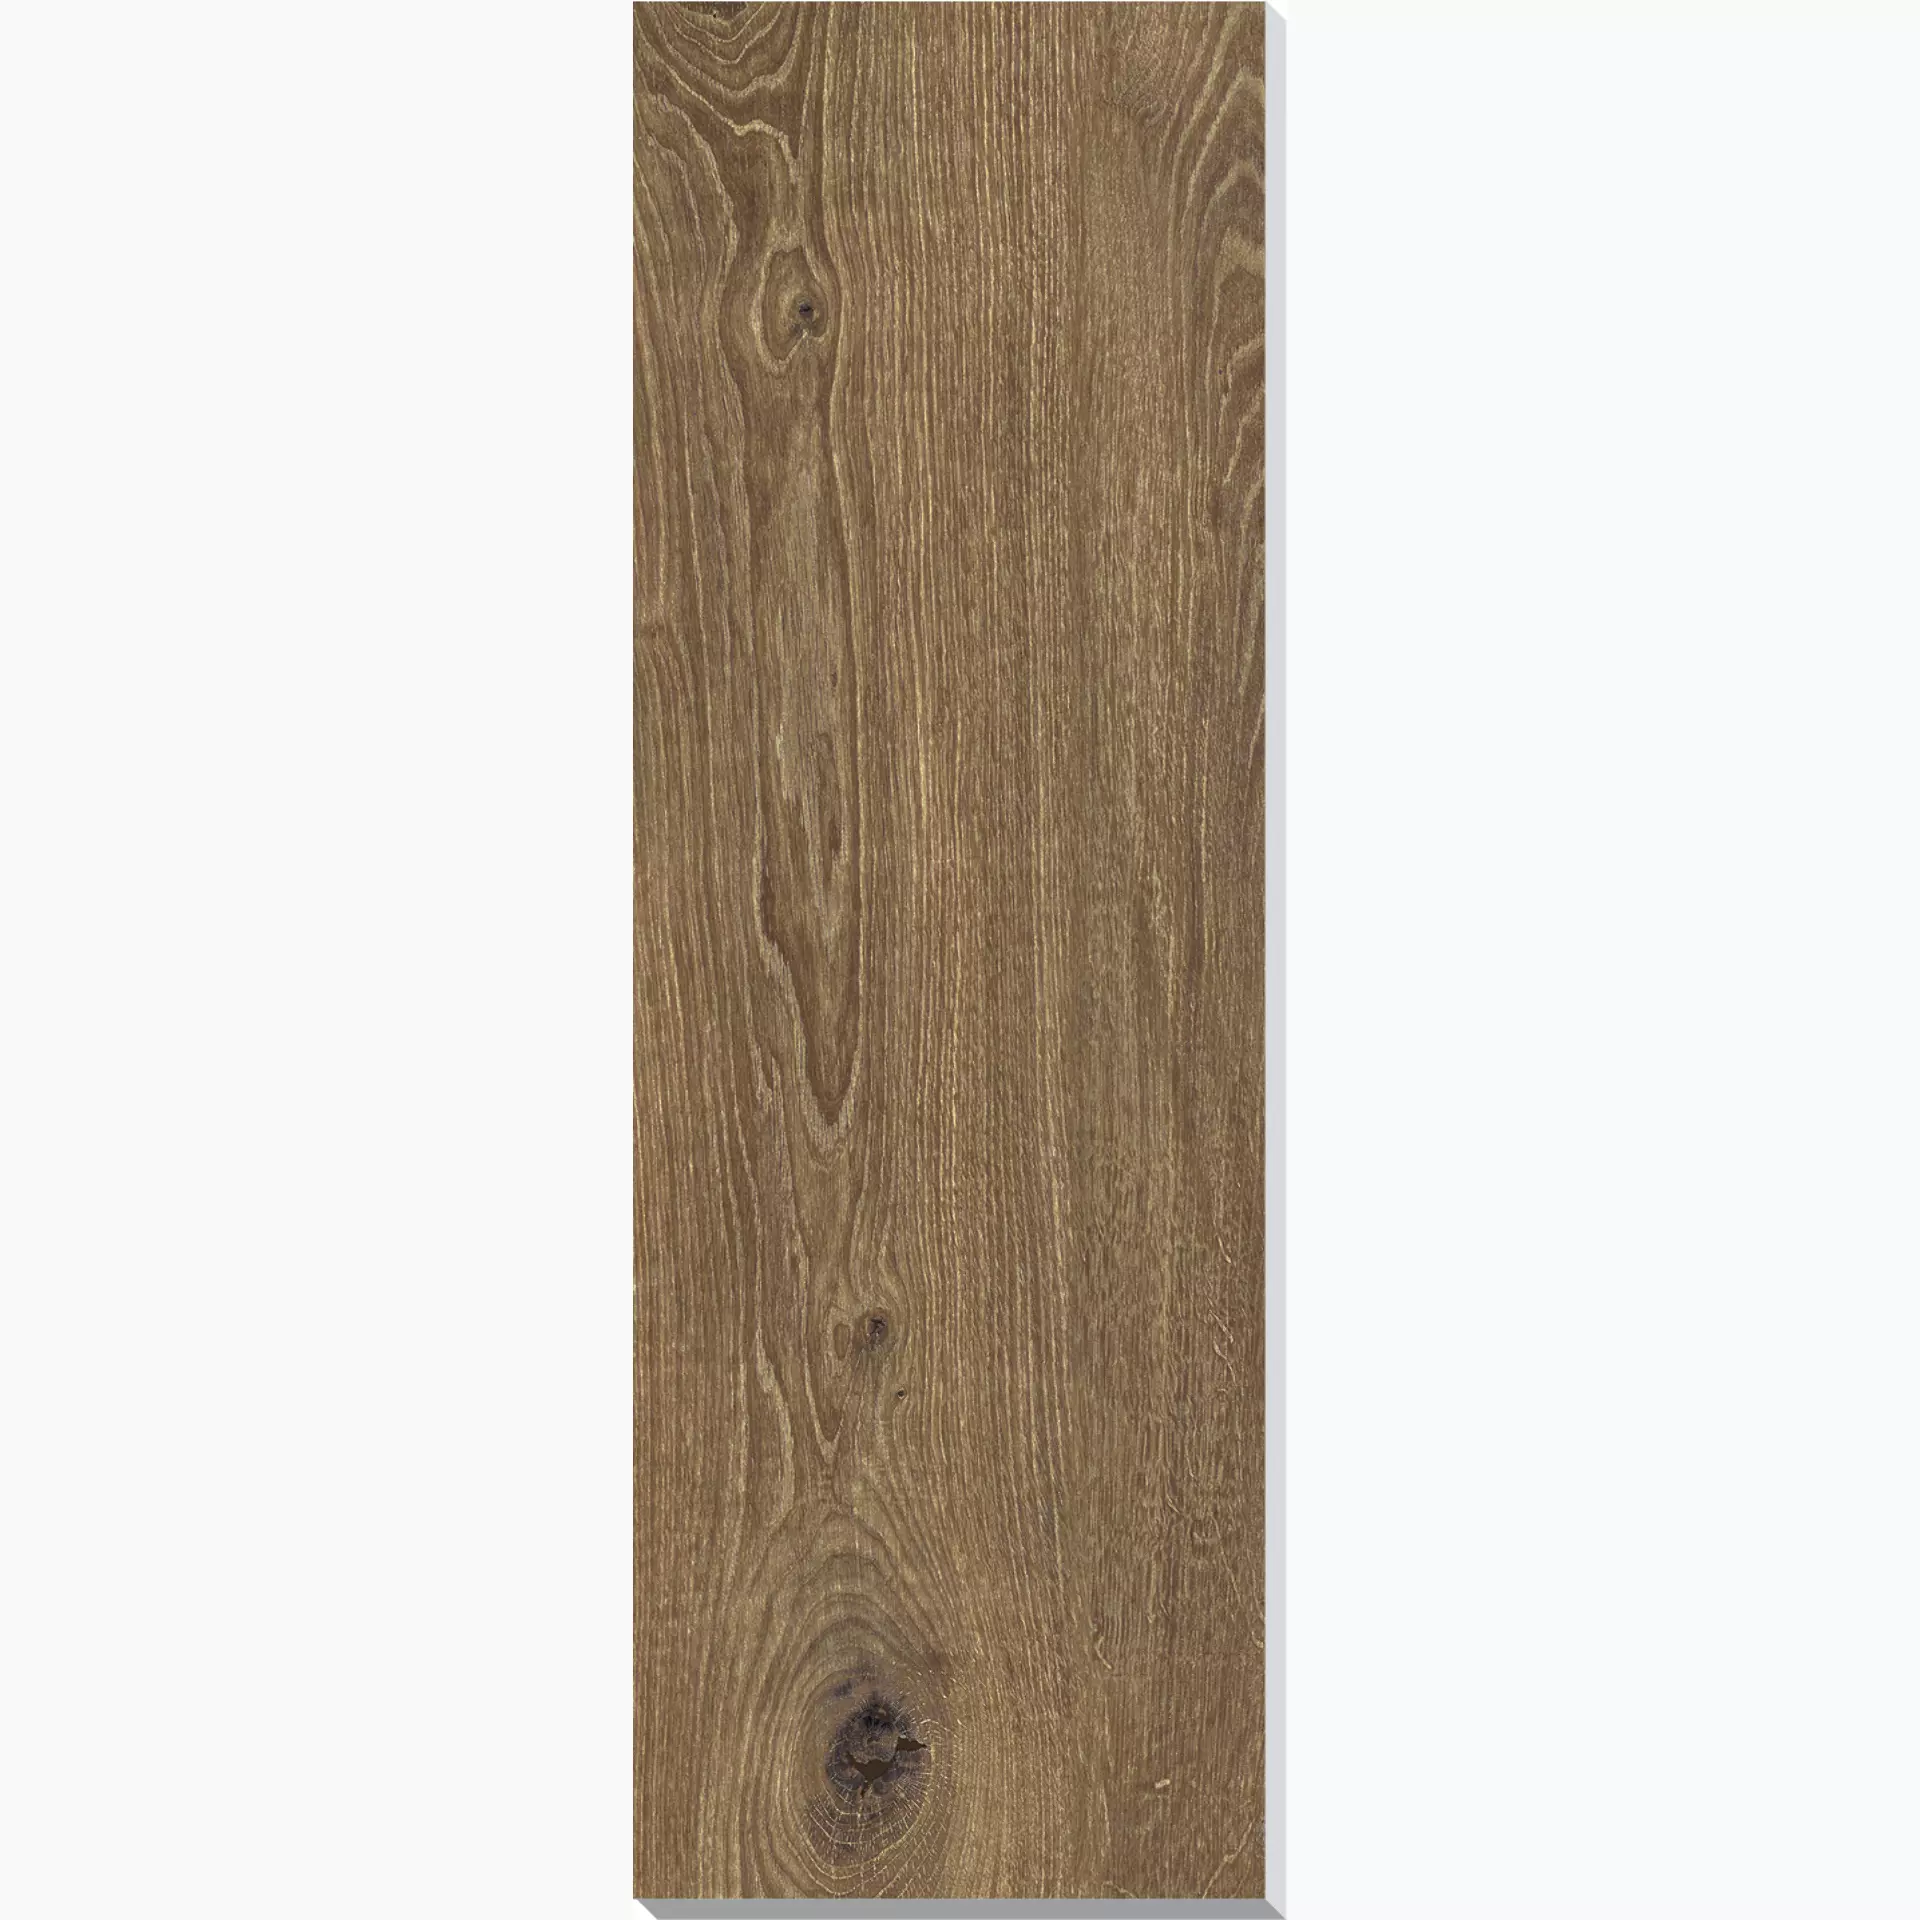 Novabell Artwood Clay Outwalk – Naturale AWD22RT 40x120cm rectified 20mm